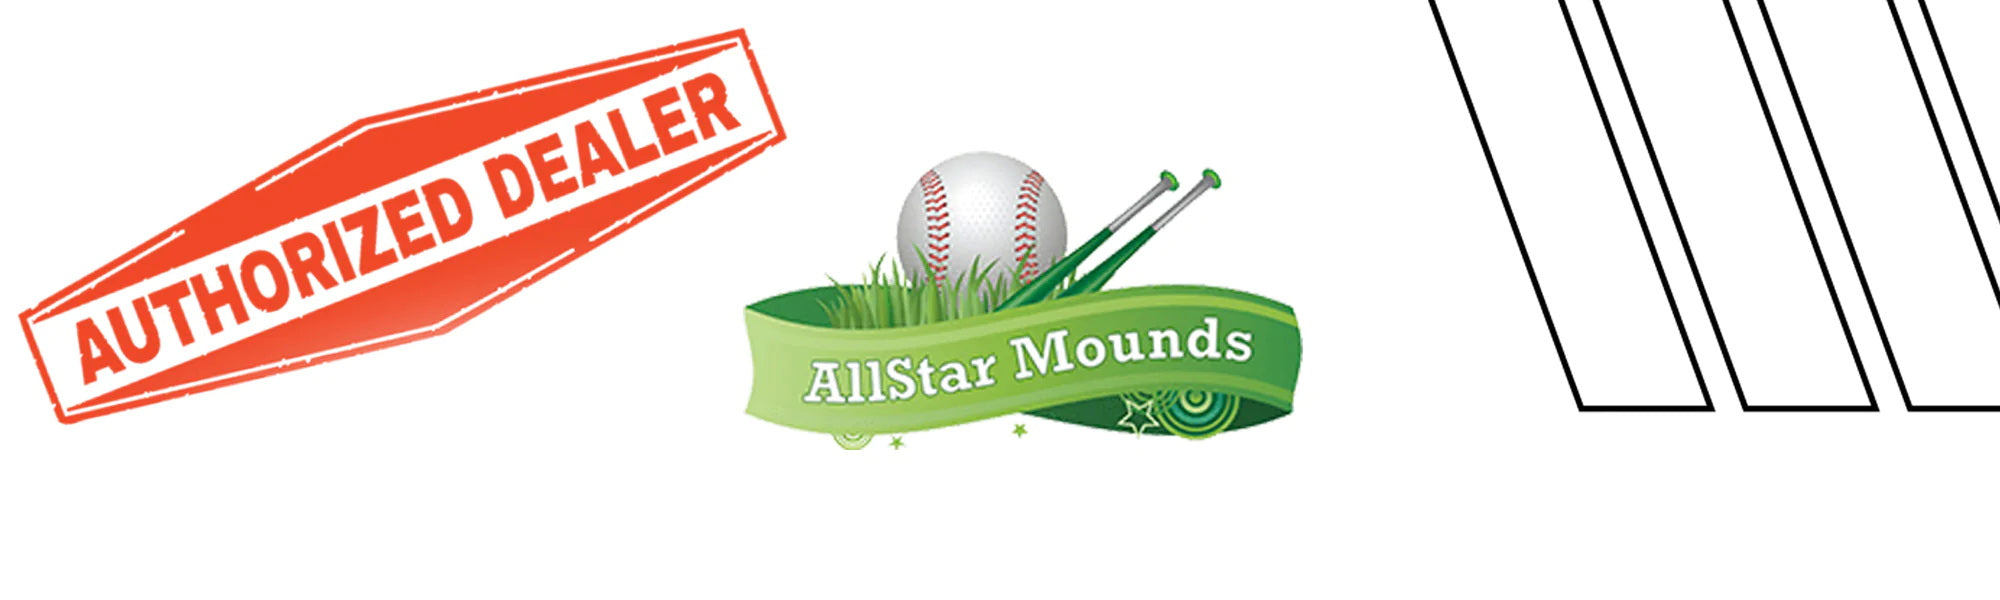 Allstar Portable Pitching Mounds